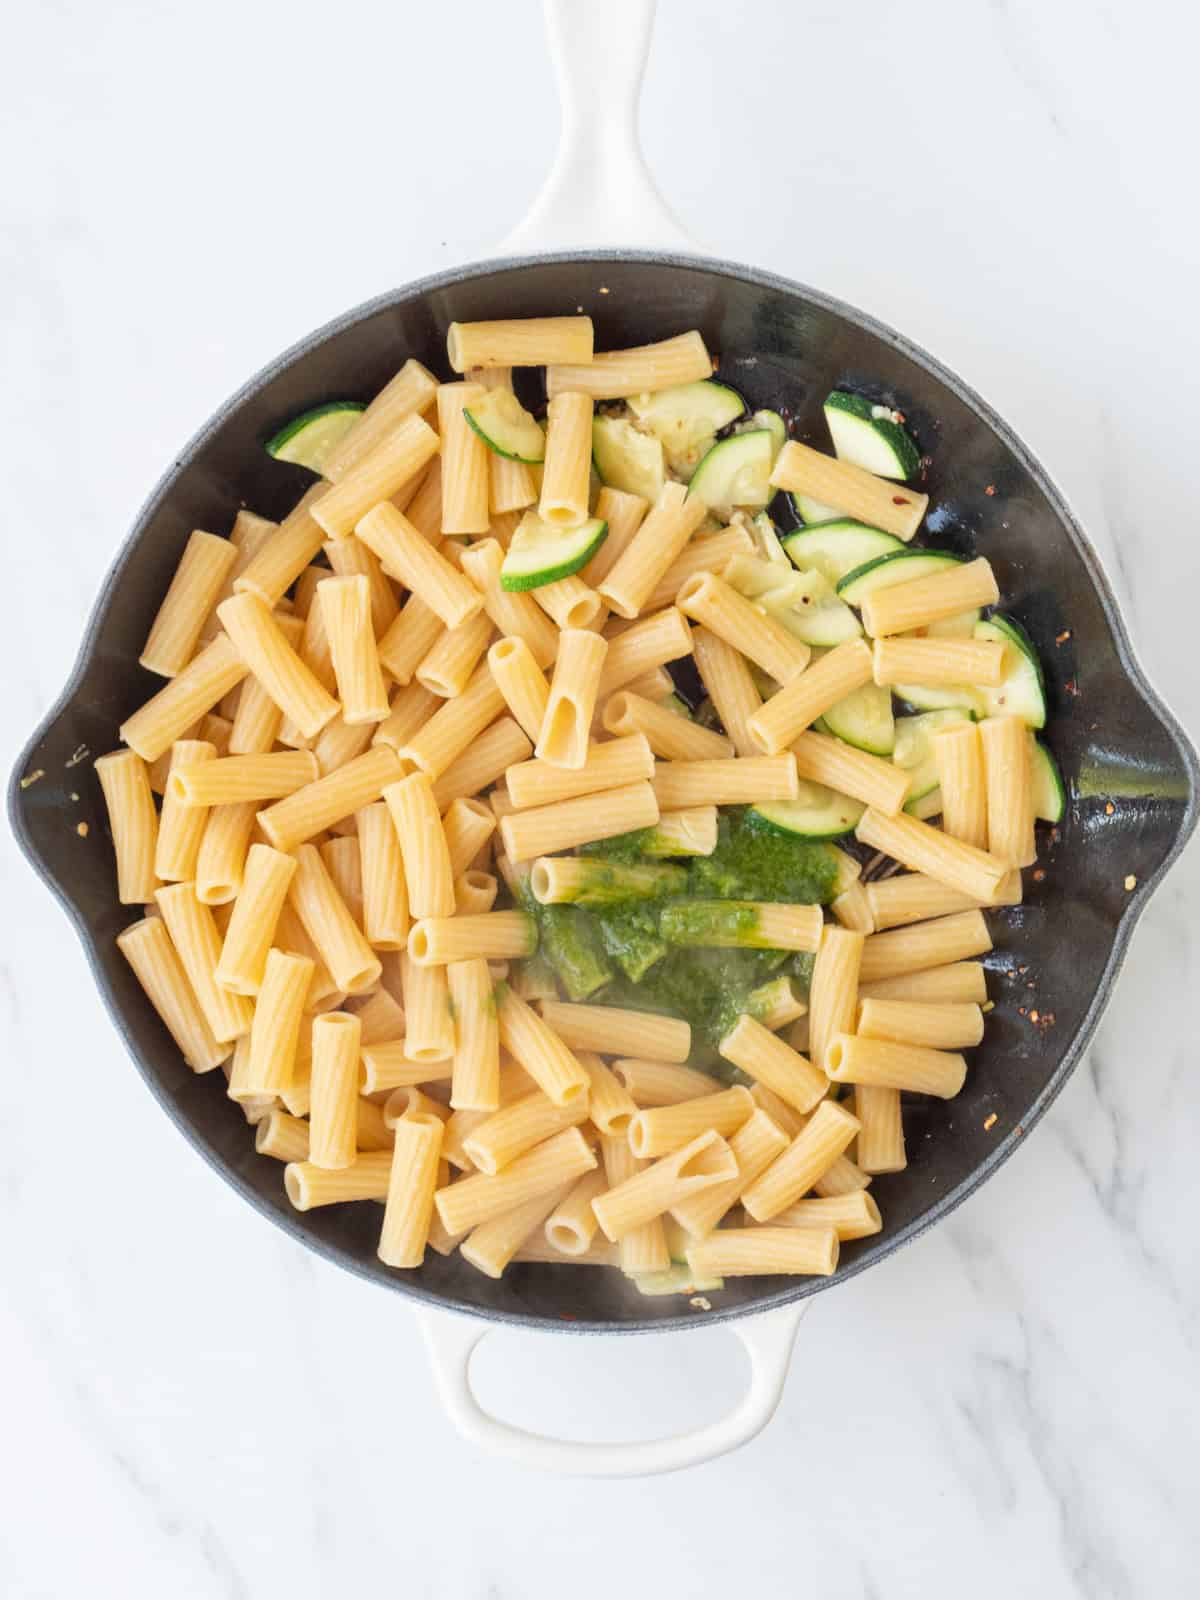 A skillet with sautéed zucchini, with pasta and basil vinaigrette added to it.